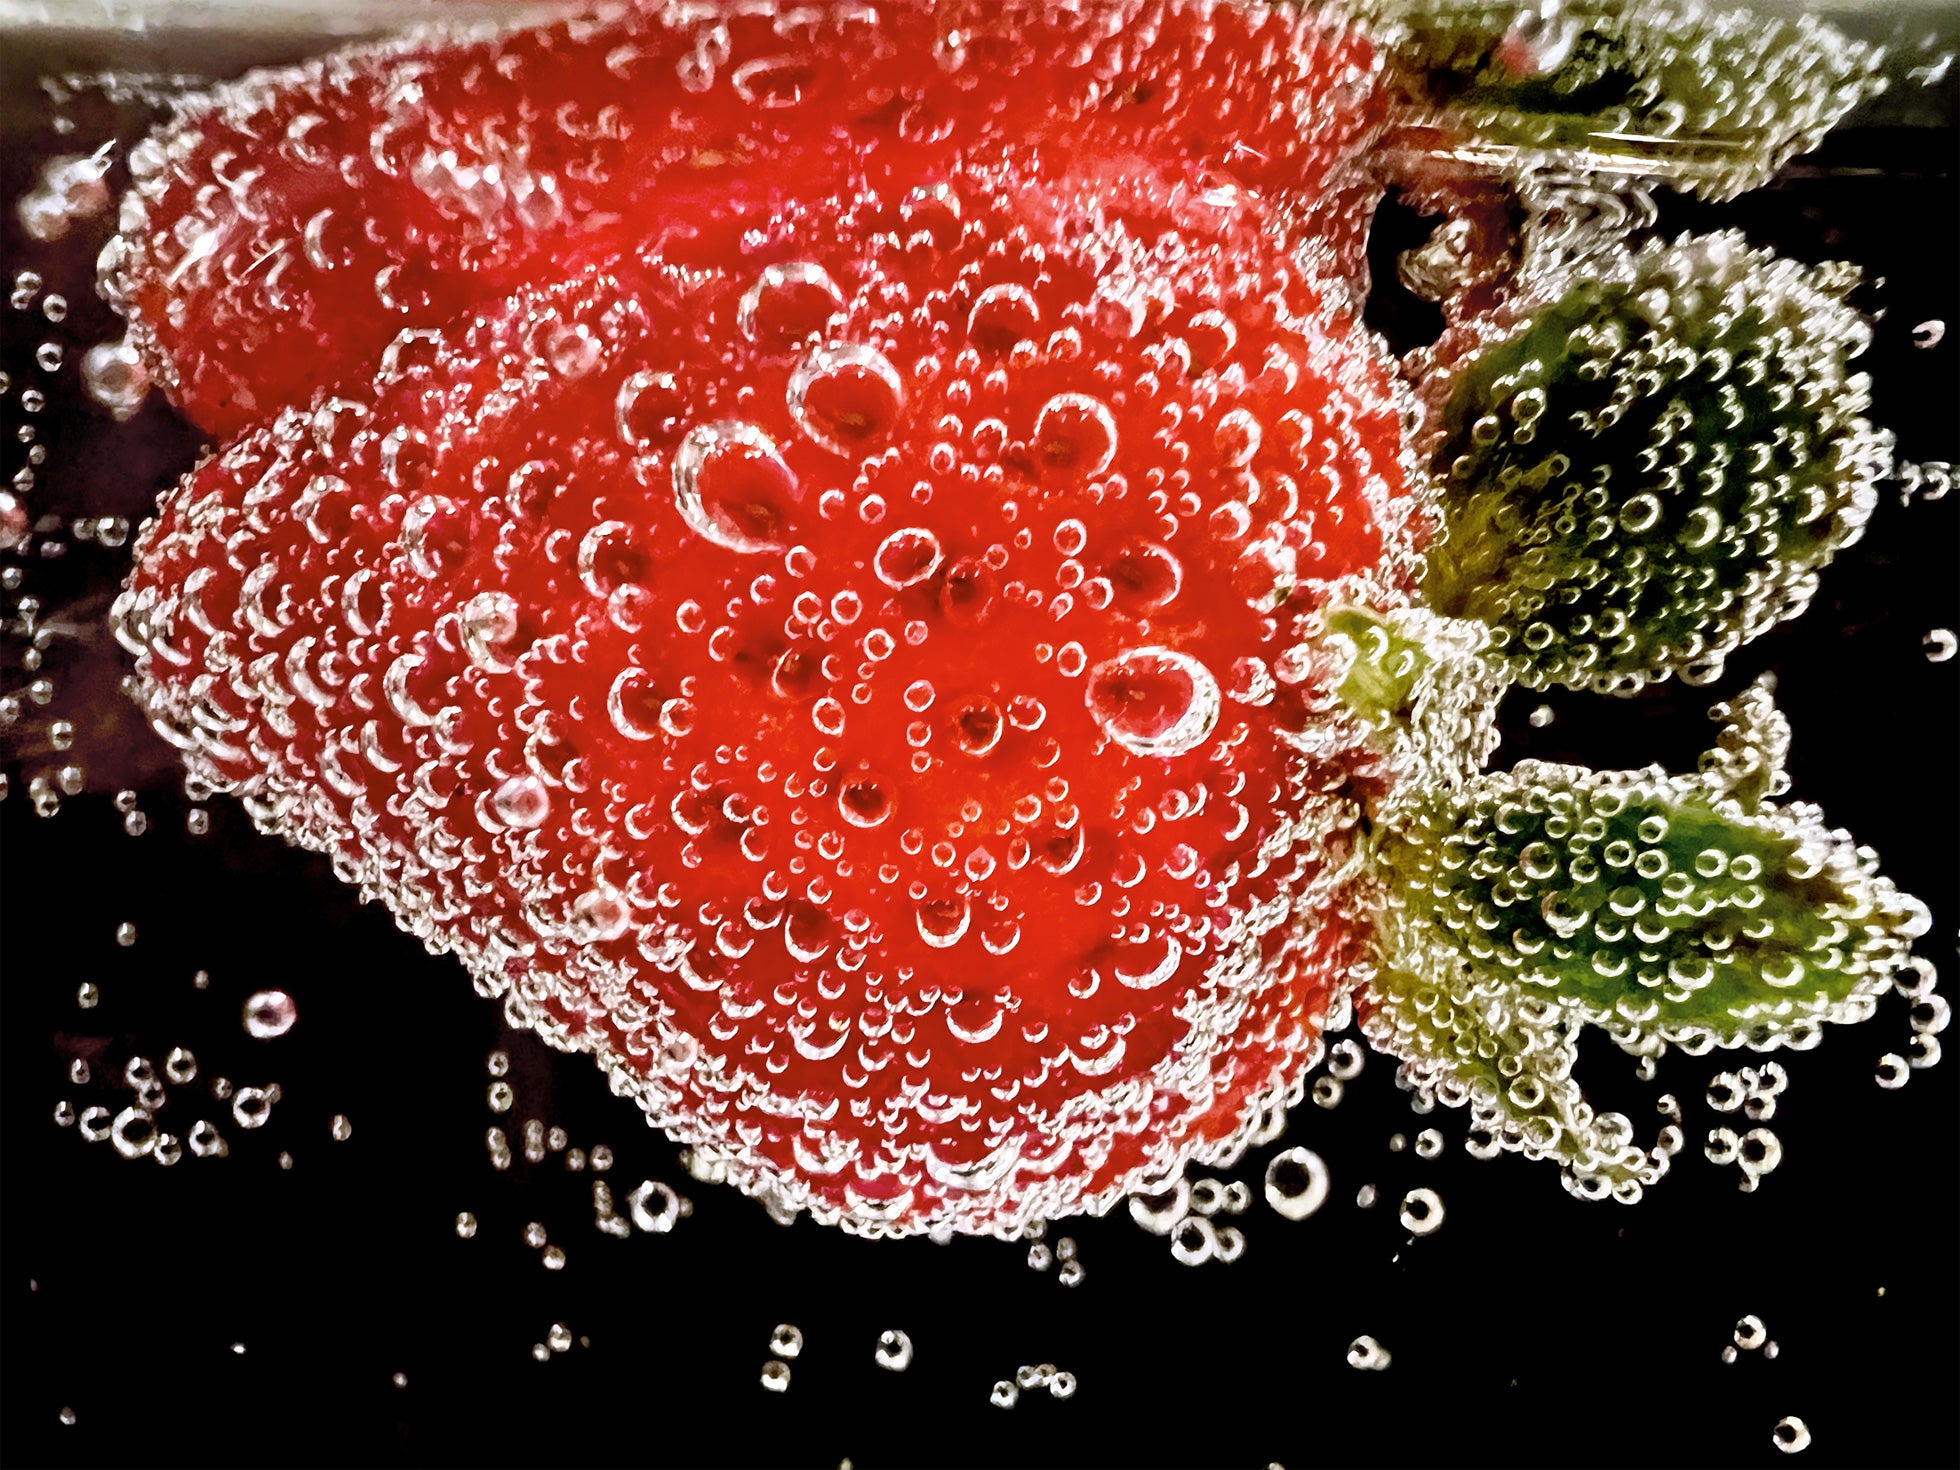 strawberry covered in soda bubbles for apple shot on iphone macro challenge